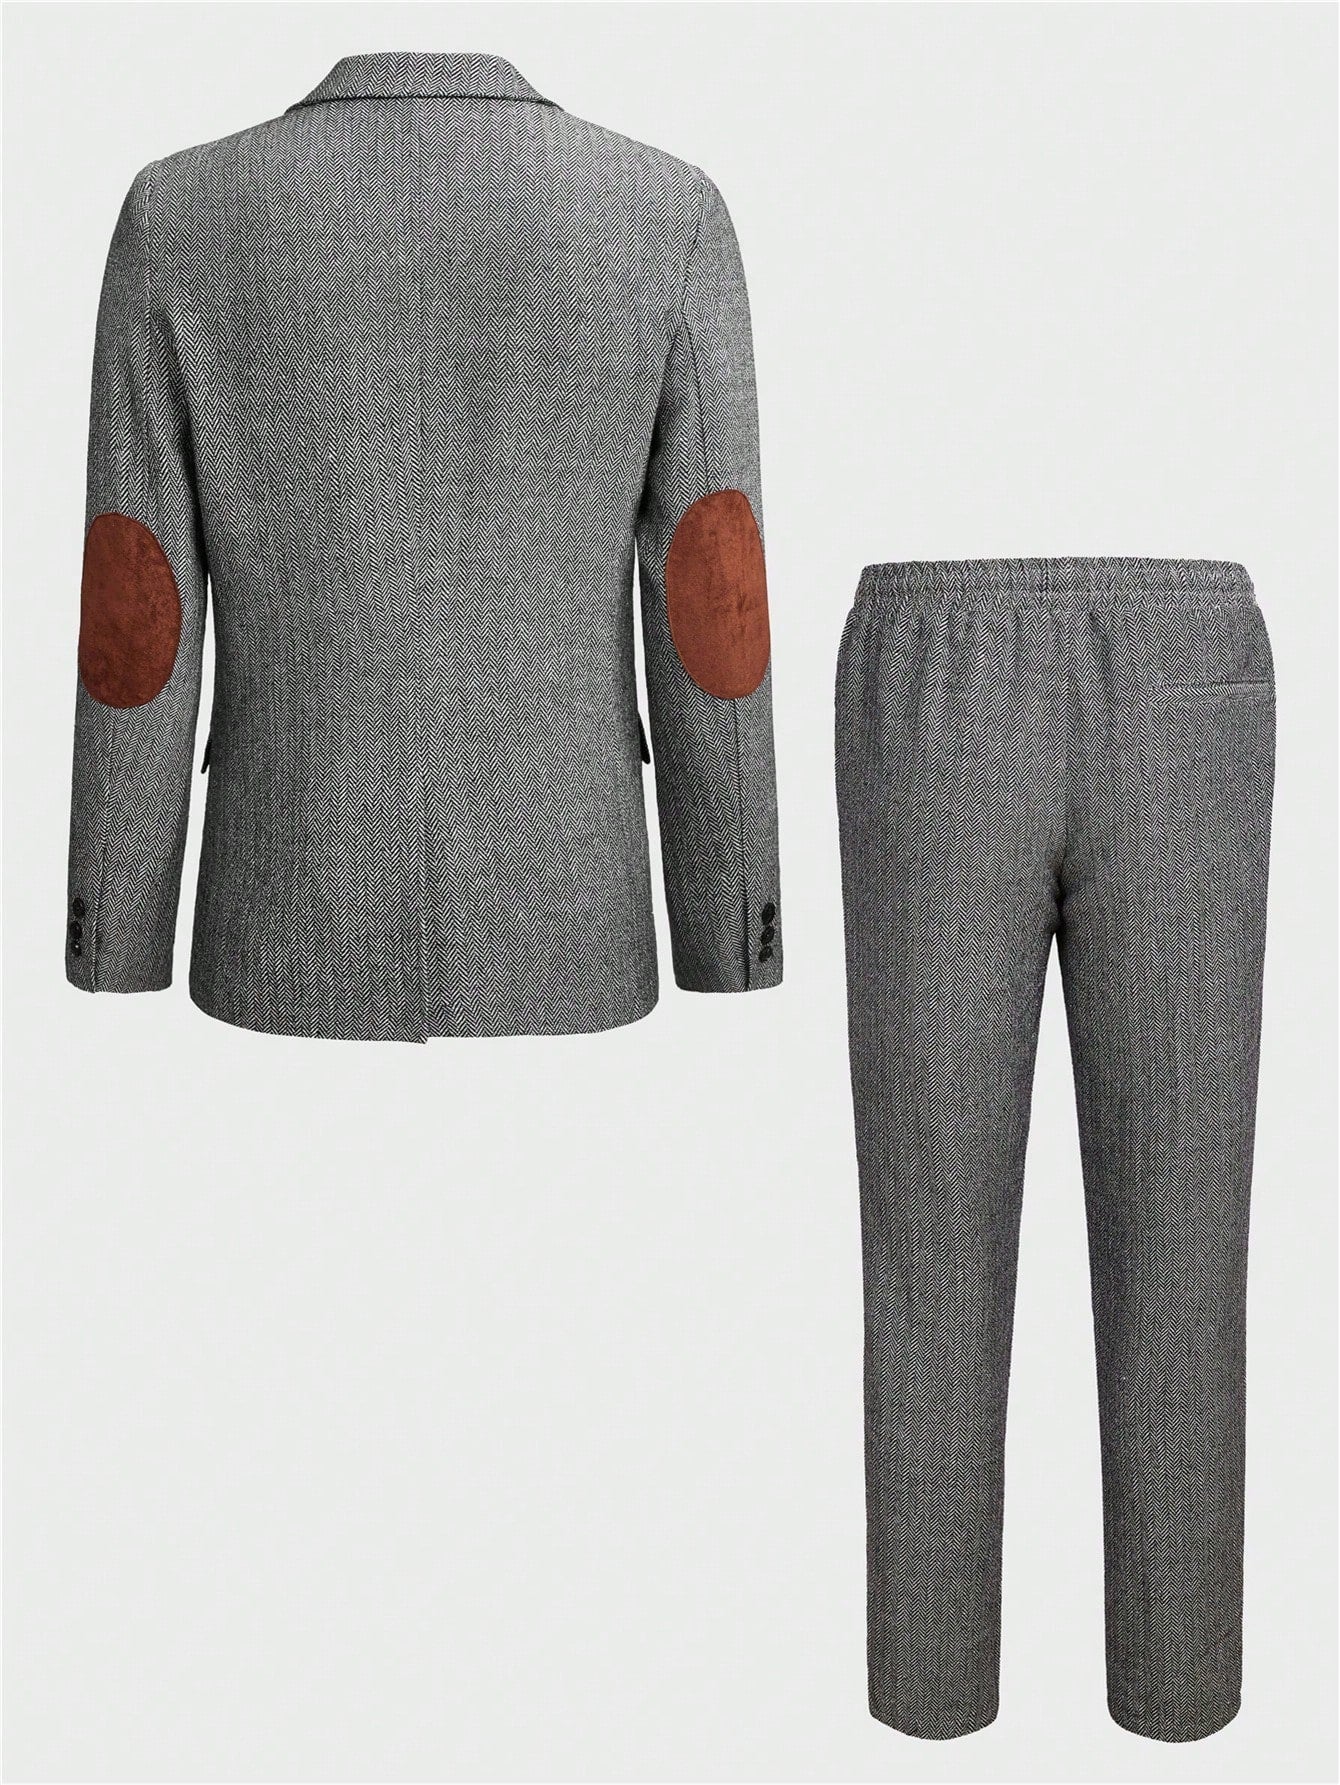 Manfinity Mode Men's Woven Suit Jacket And Trousers Set